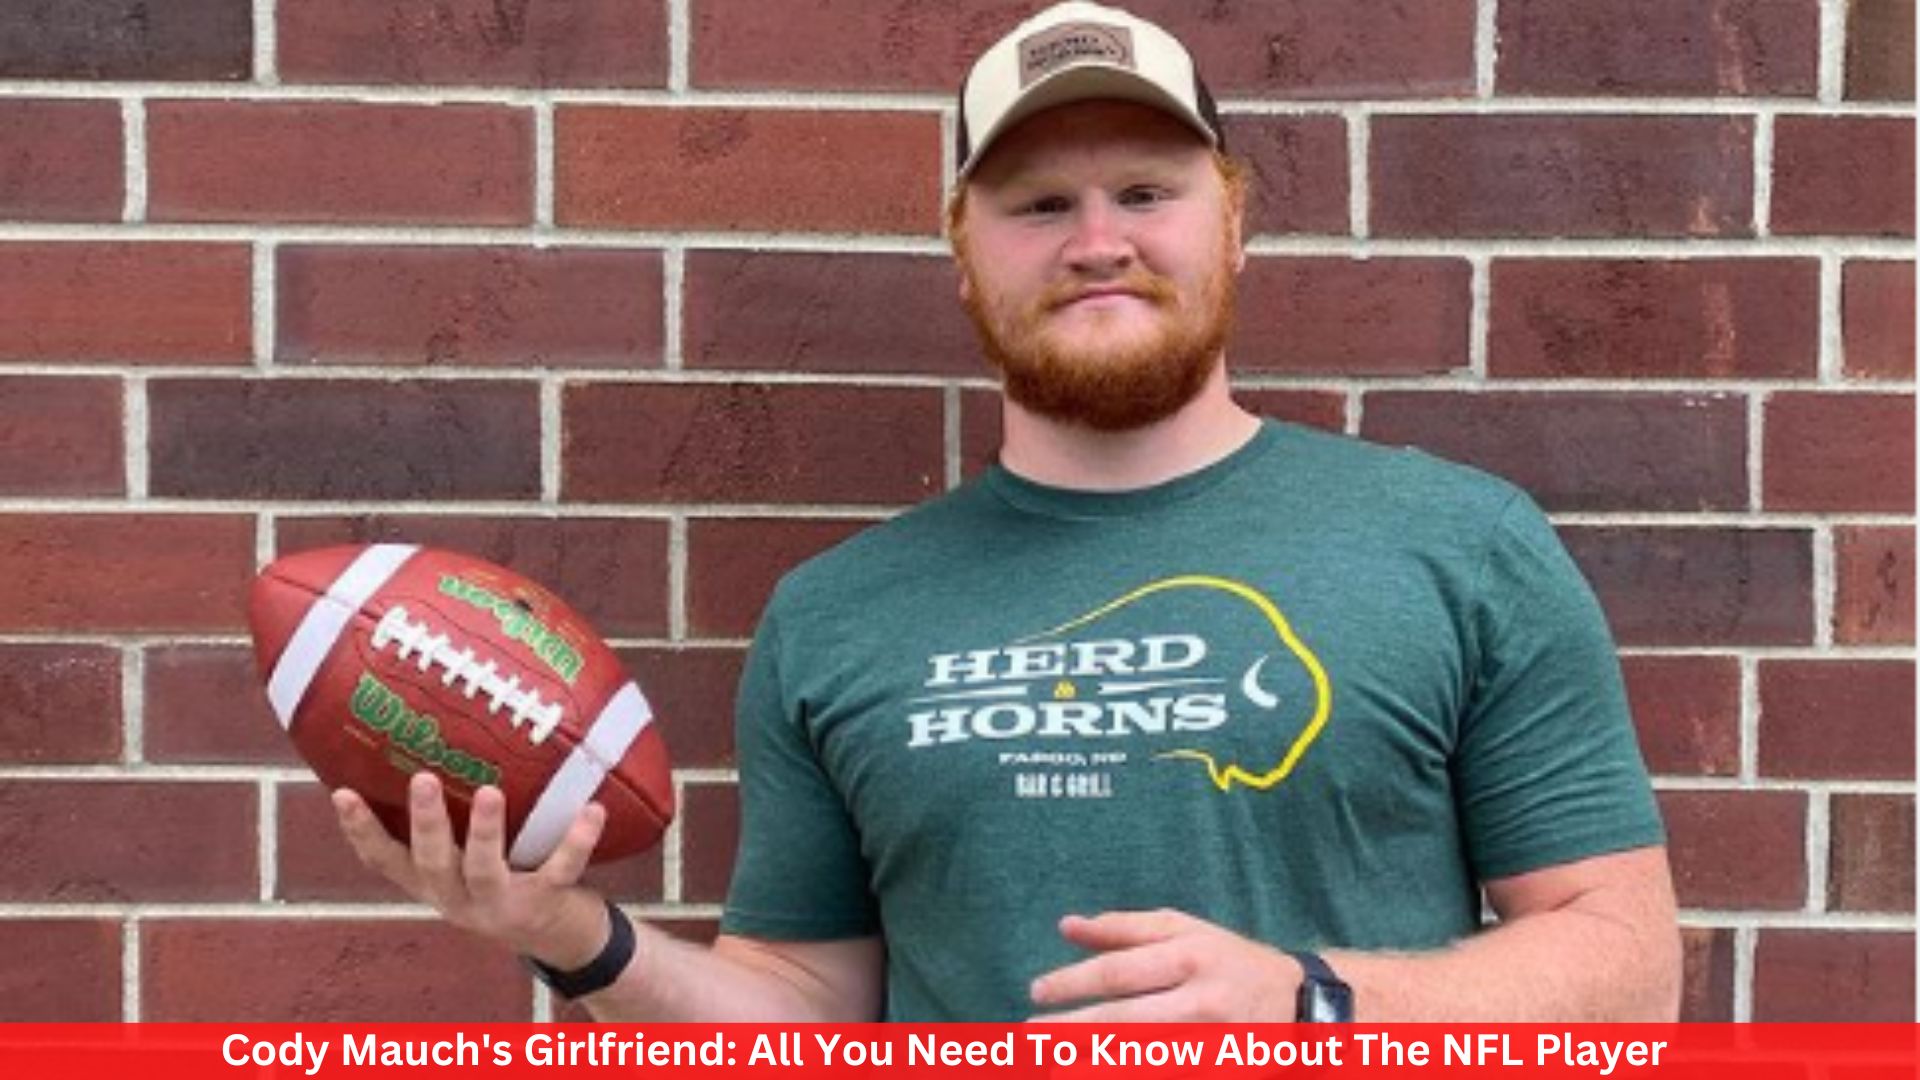 Cody Mauch's Girlfriend: All You Need To Know About The NFL Player